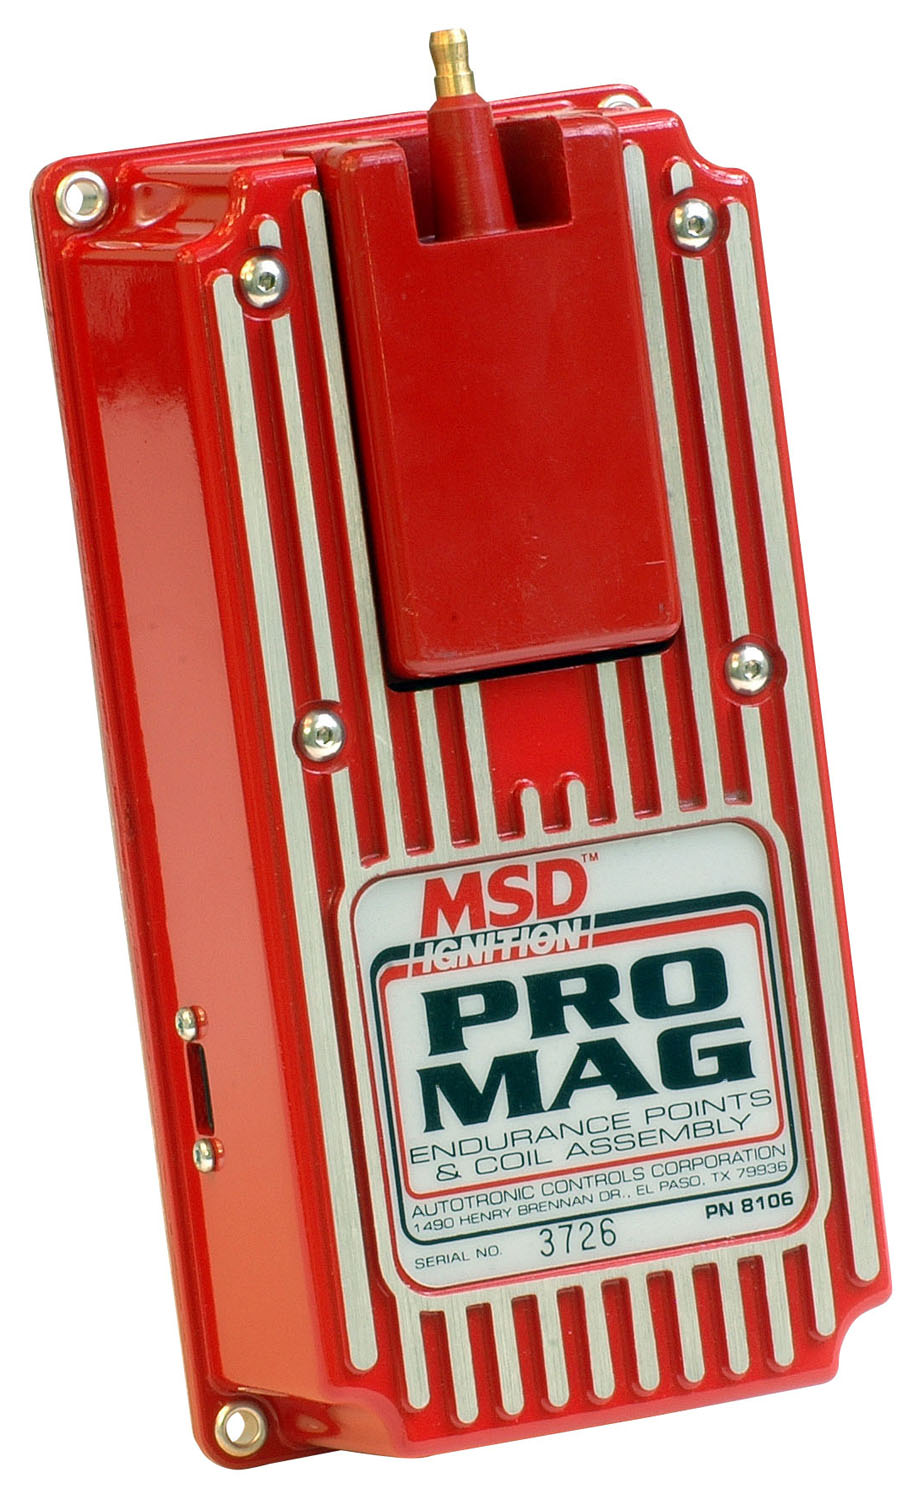 MSD Ignition MSD Ignition 8106 Pro Mag Electronic Points Box